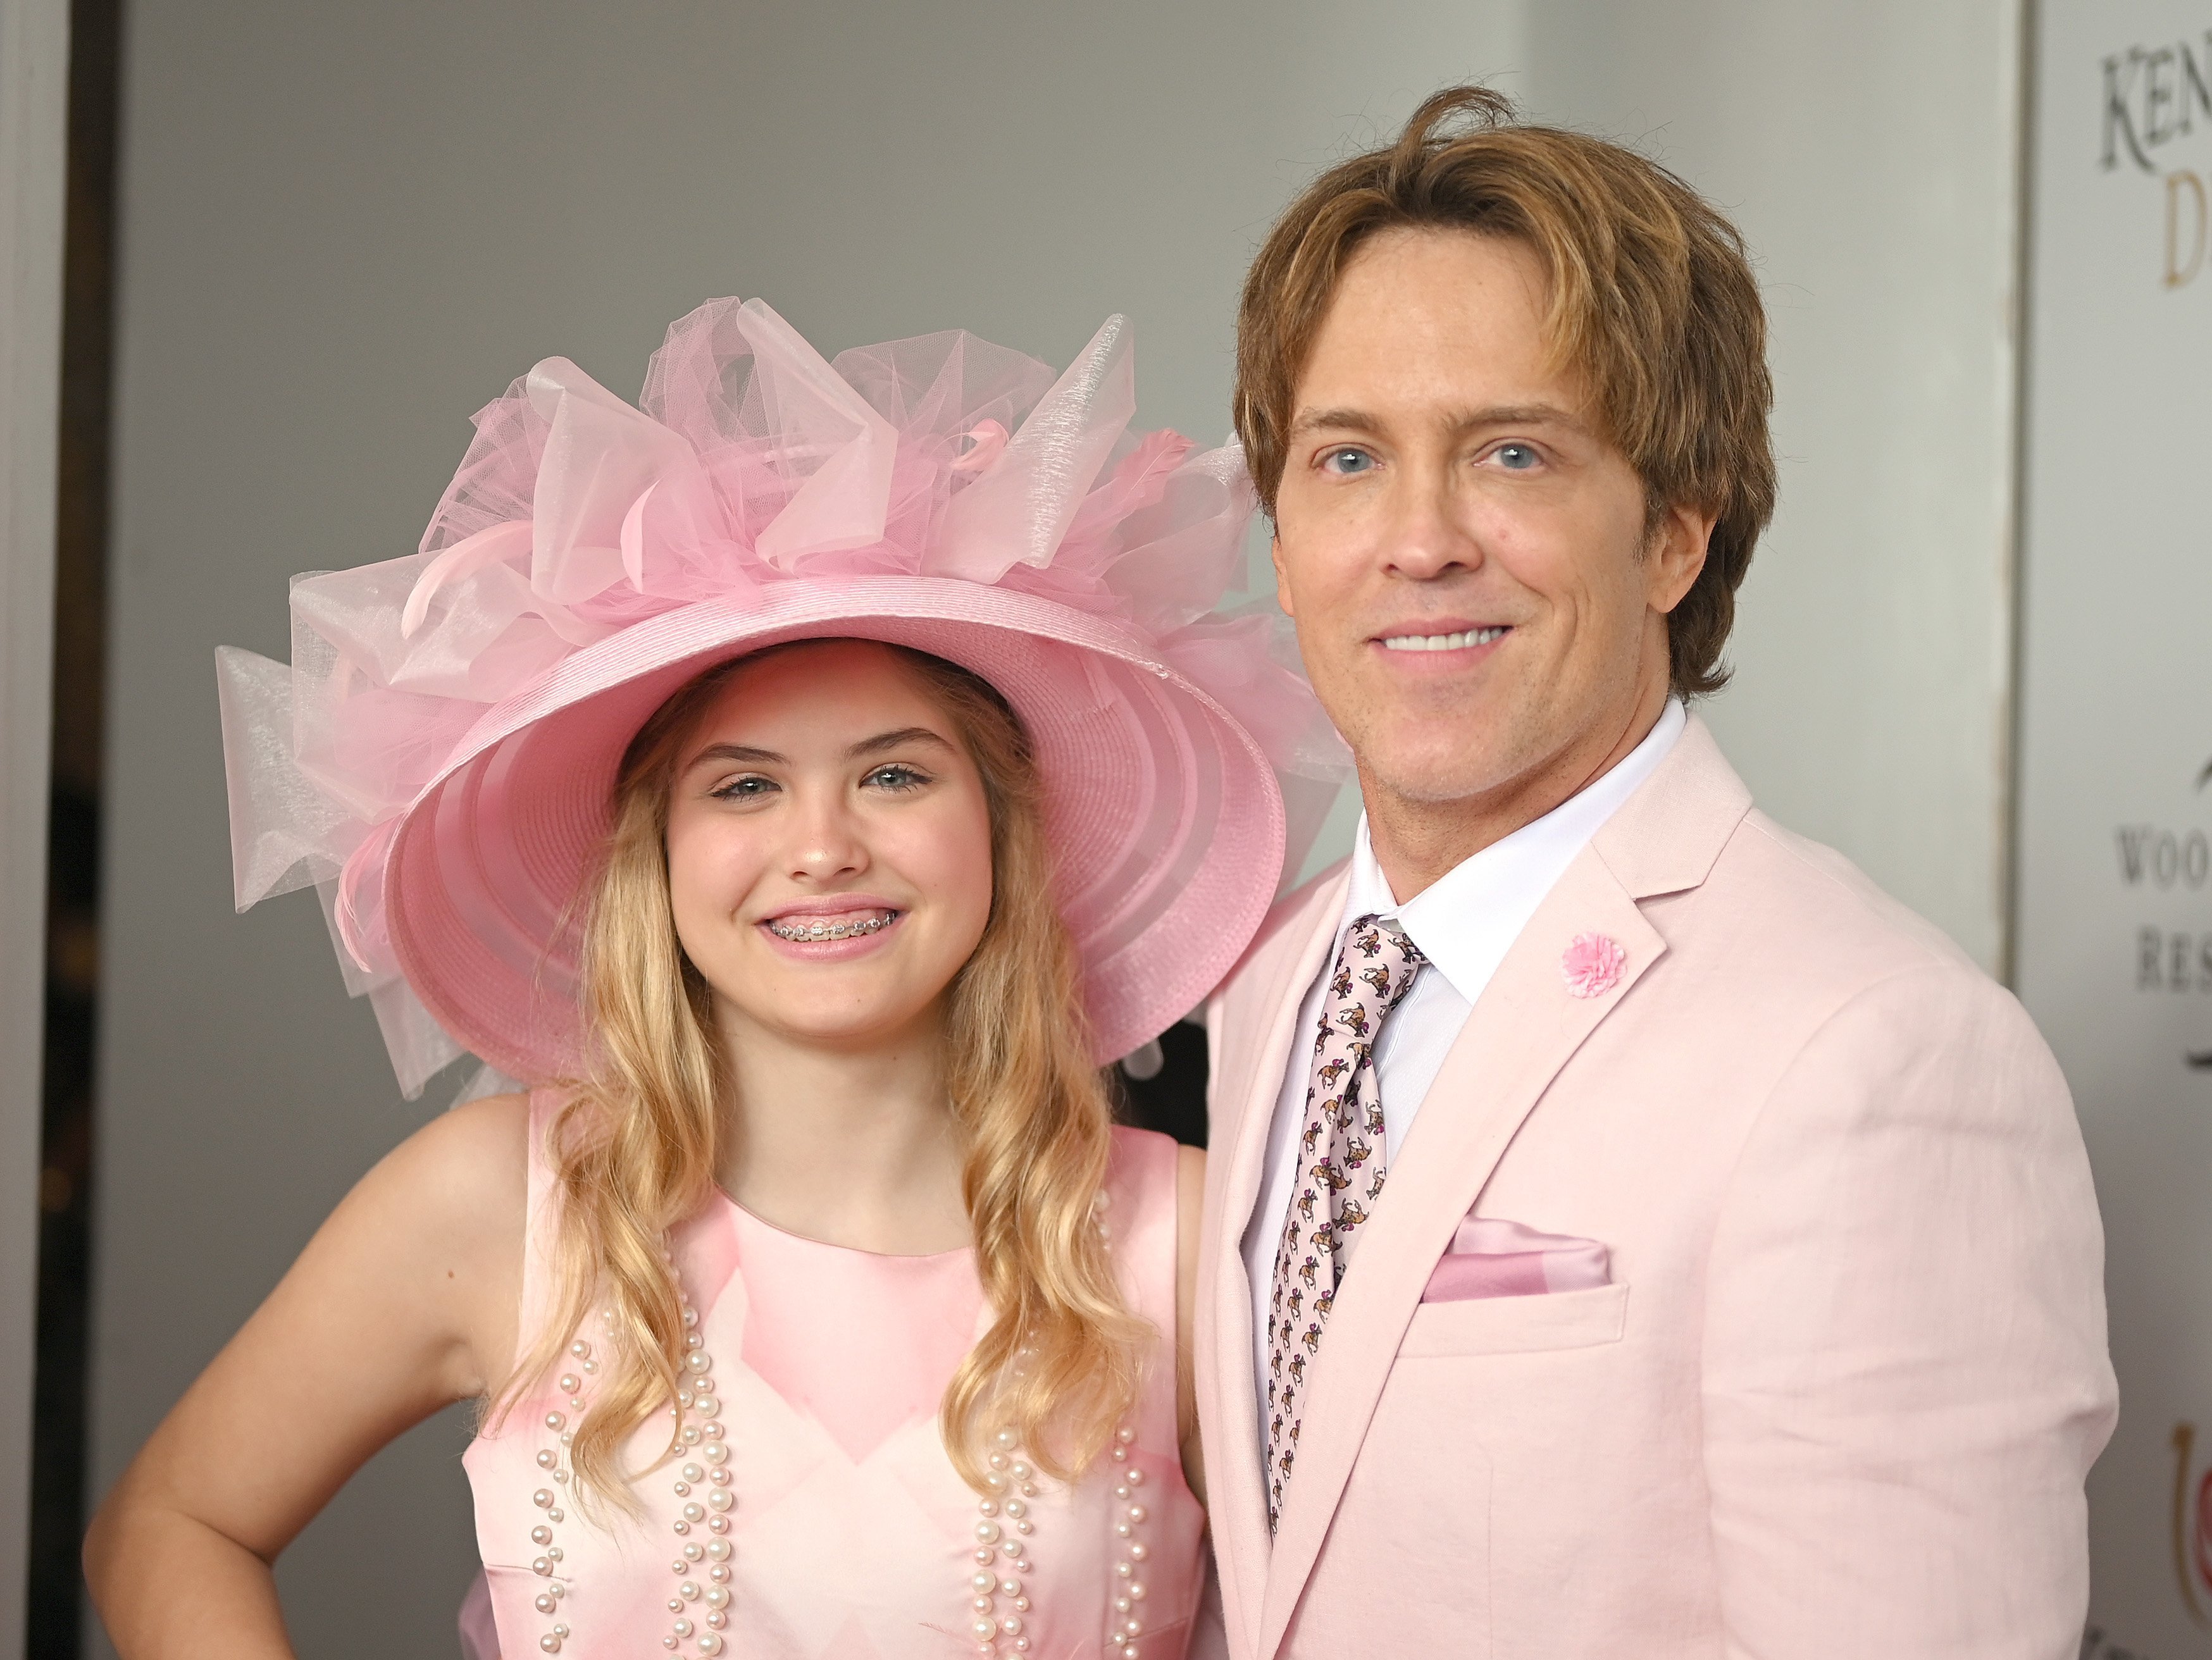 Dannielynn Birkhead and Larry Birkhead attends the 145th Kentucky Derby at Churchill Downs on May 04, 2019 in Louisville, Kentucky. | Photo: Getty Images